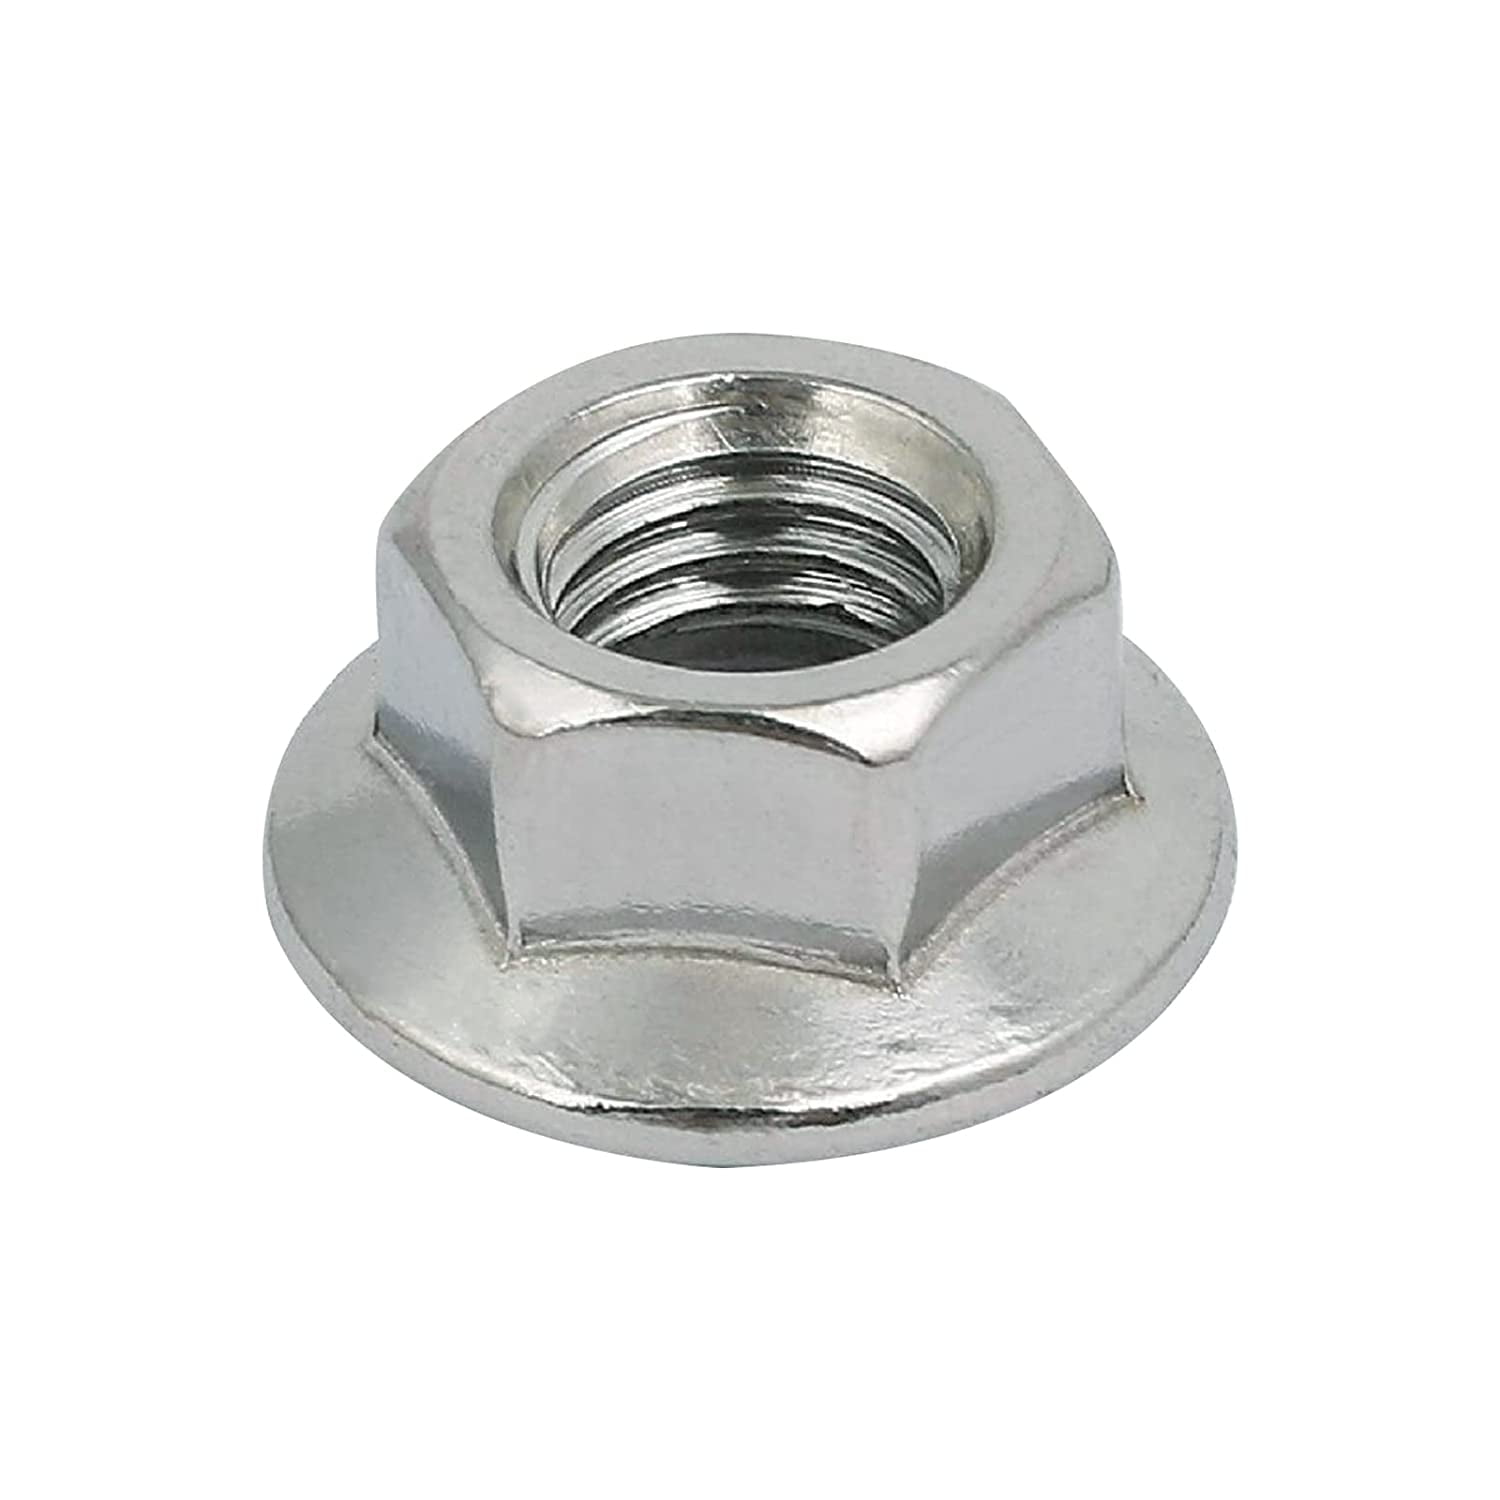 Bright Zinc Plated Flange nuts Serrated 10mm Pack of 24 *Top Quality! 